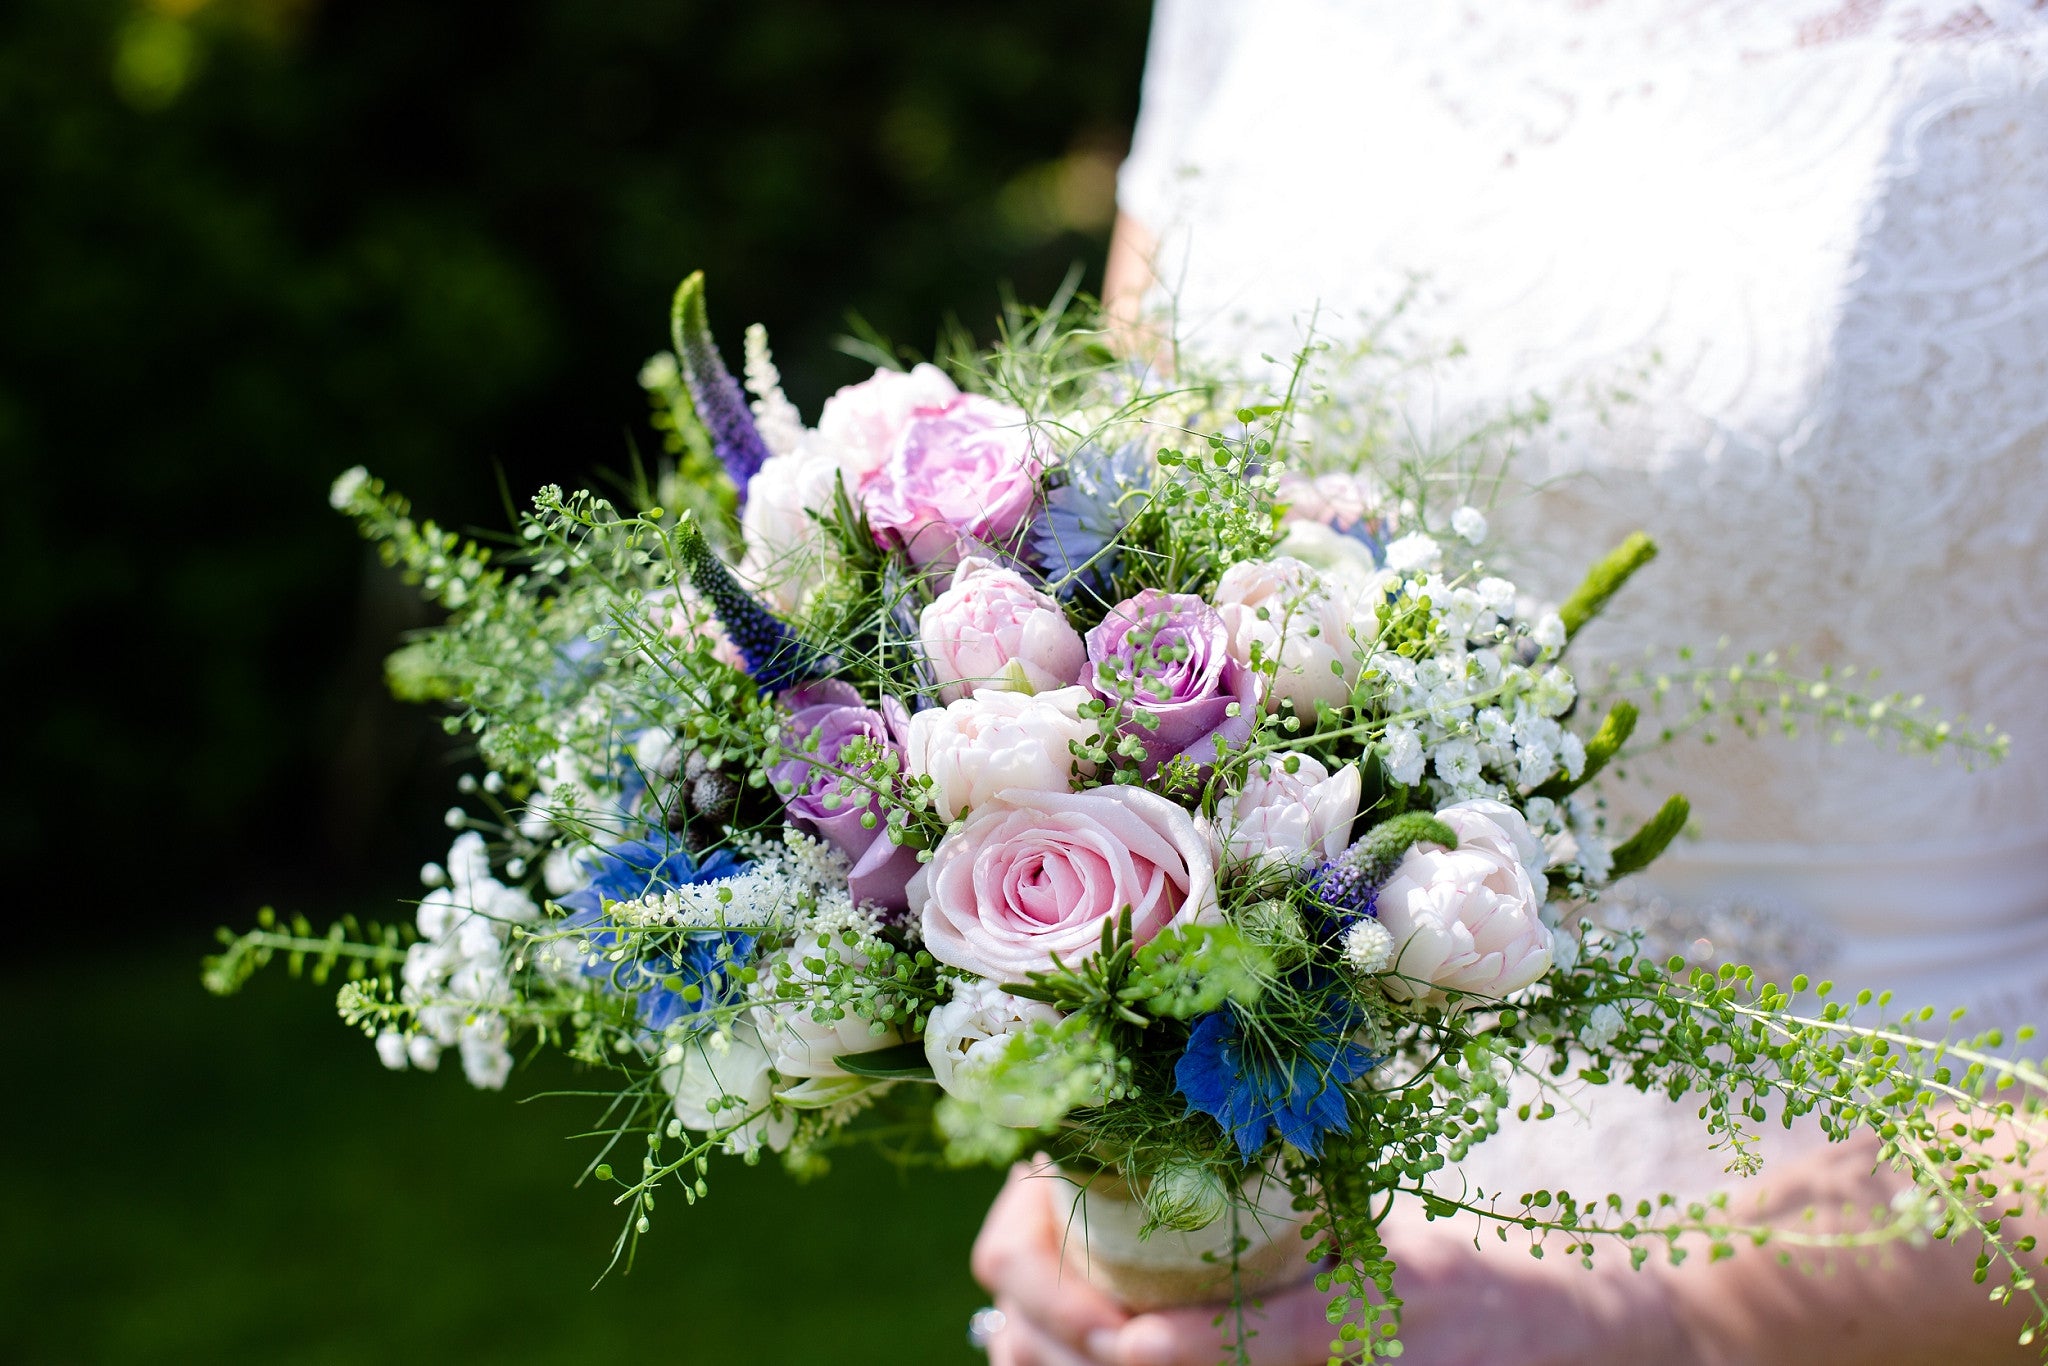 Bridal bouquet made up of pale pink Roses, lilac Lisianthus, blue Nigella, Veronica, Thlaspi and Gypsophila.